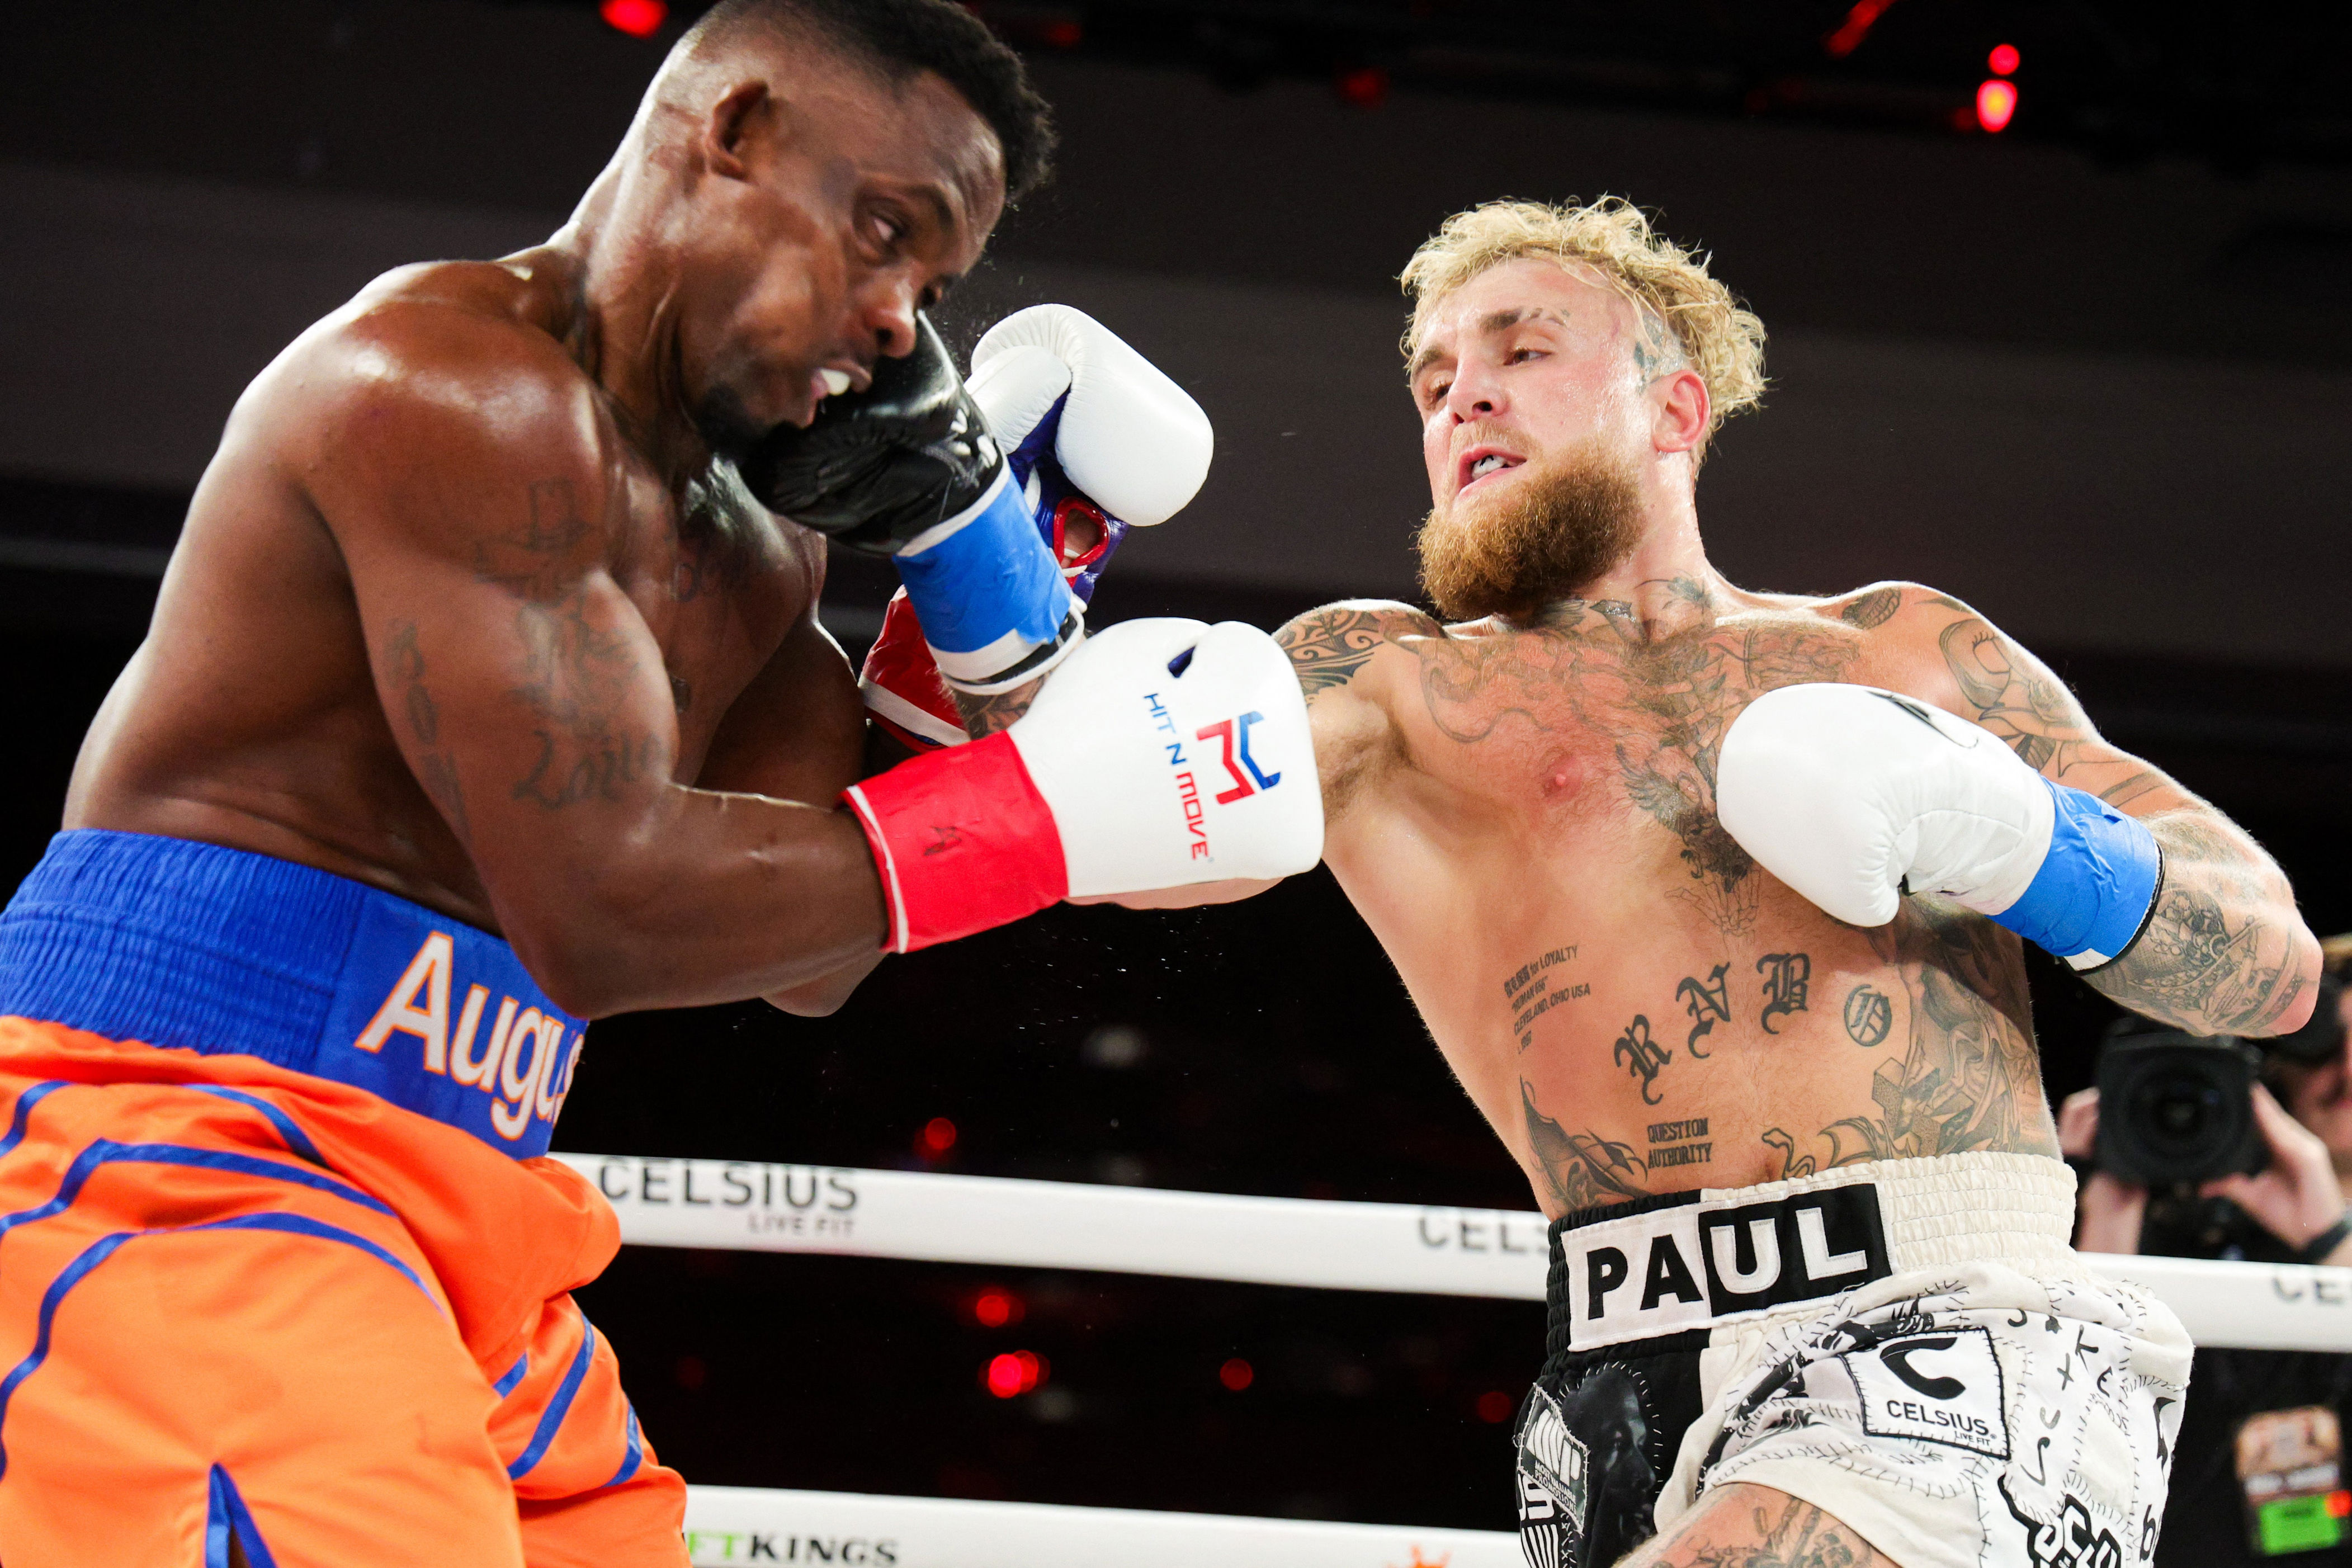 jake paul vs ryan bourland: fight time, undercard, latest odds, prediction and ring walks